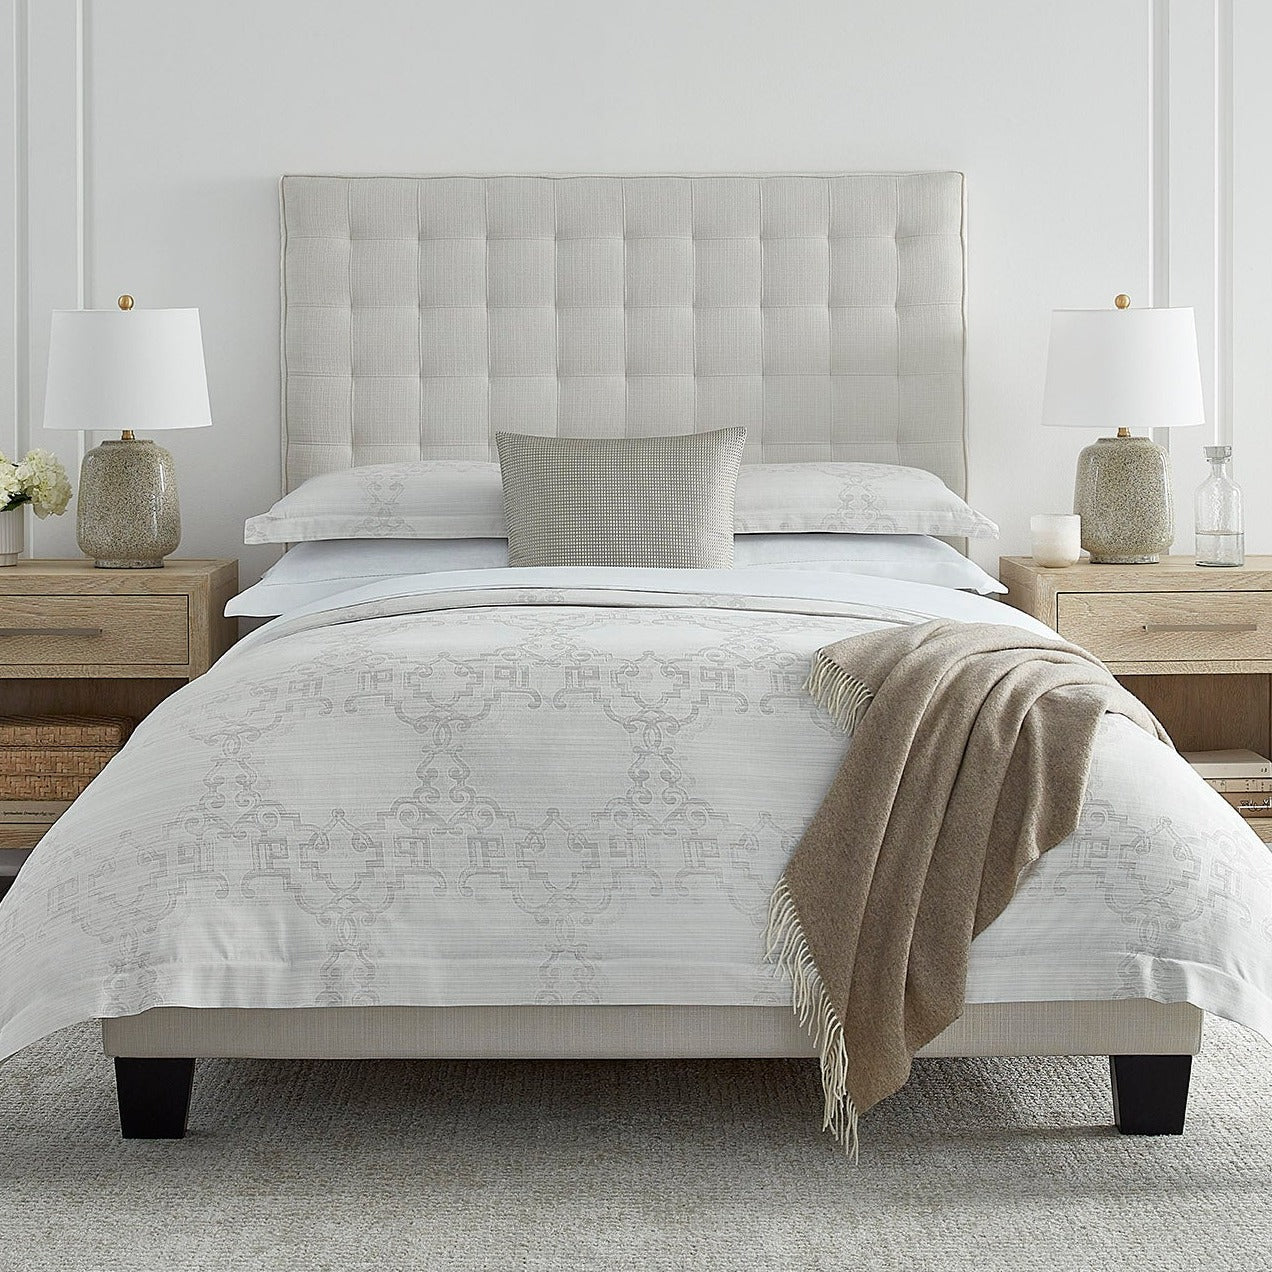 Laterina Bed Linens